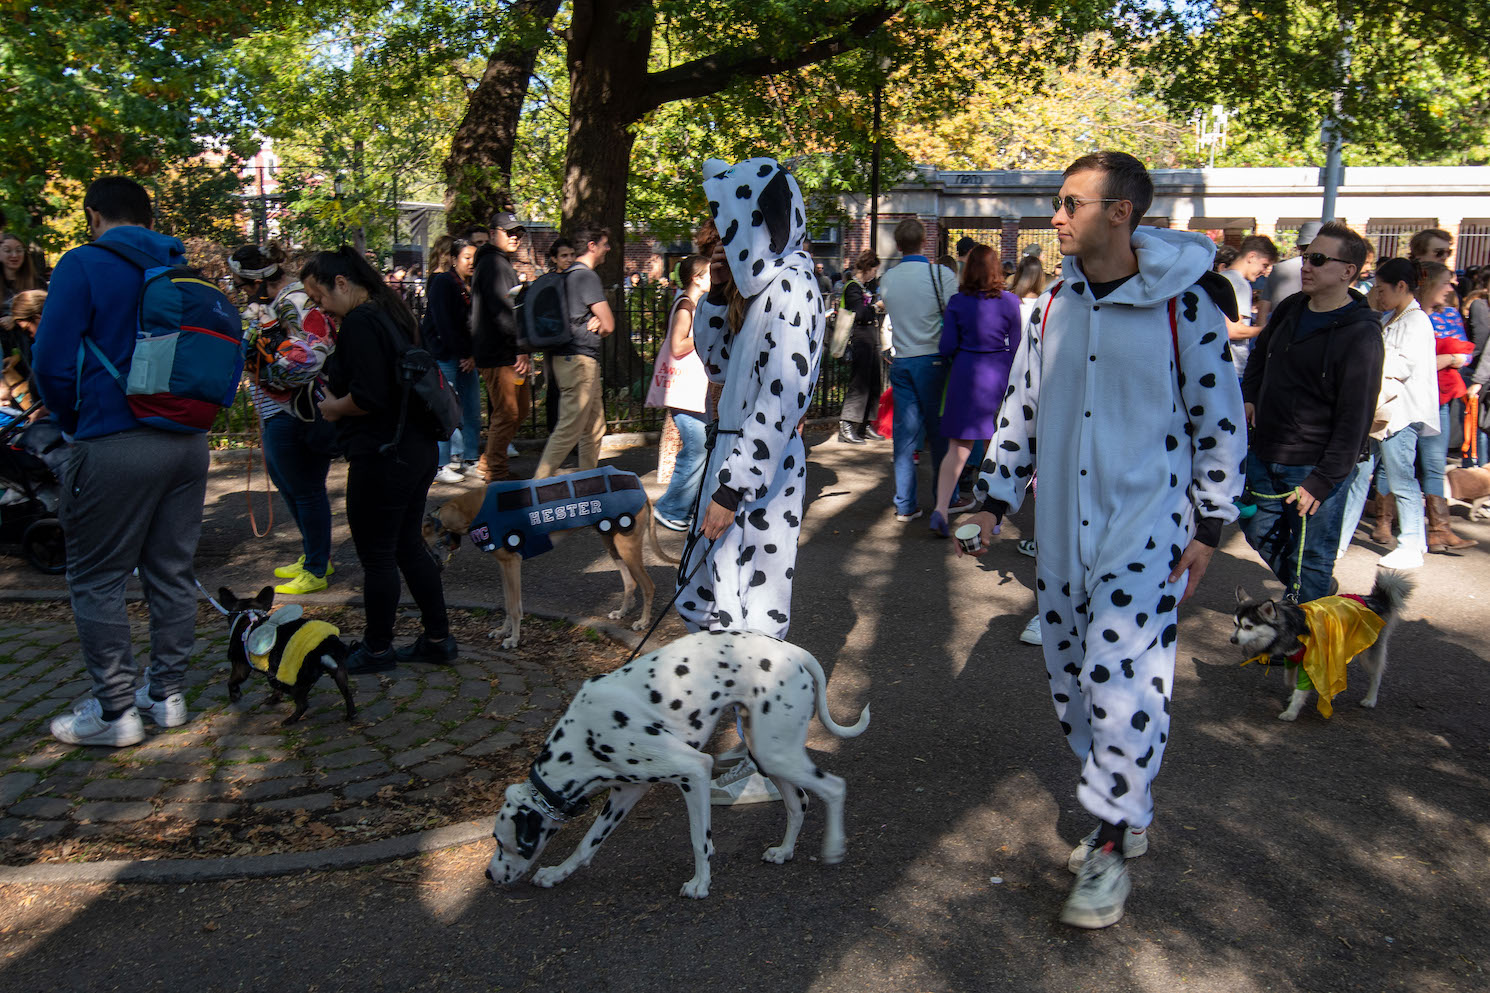 A couple wearing matching Dalmatian onesies walk with their Dalmatian through a crowd in Tompkins Square Park.